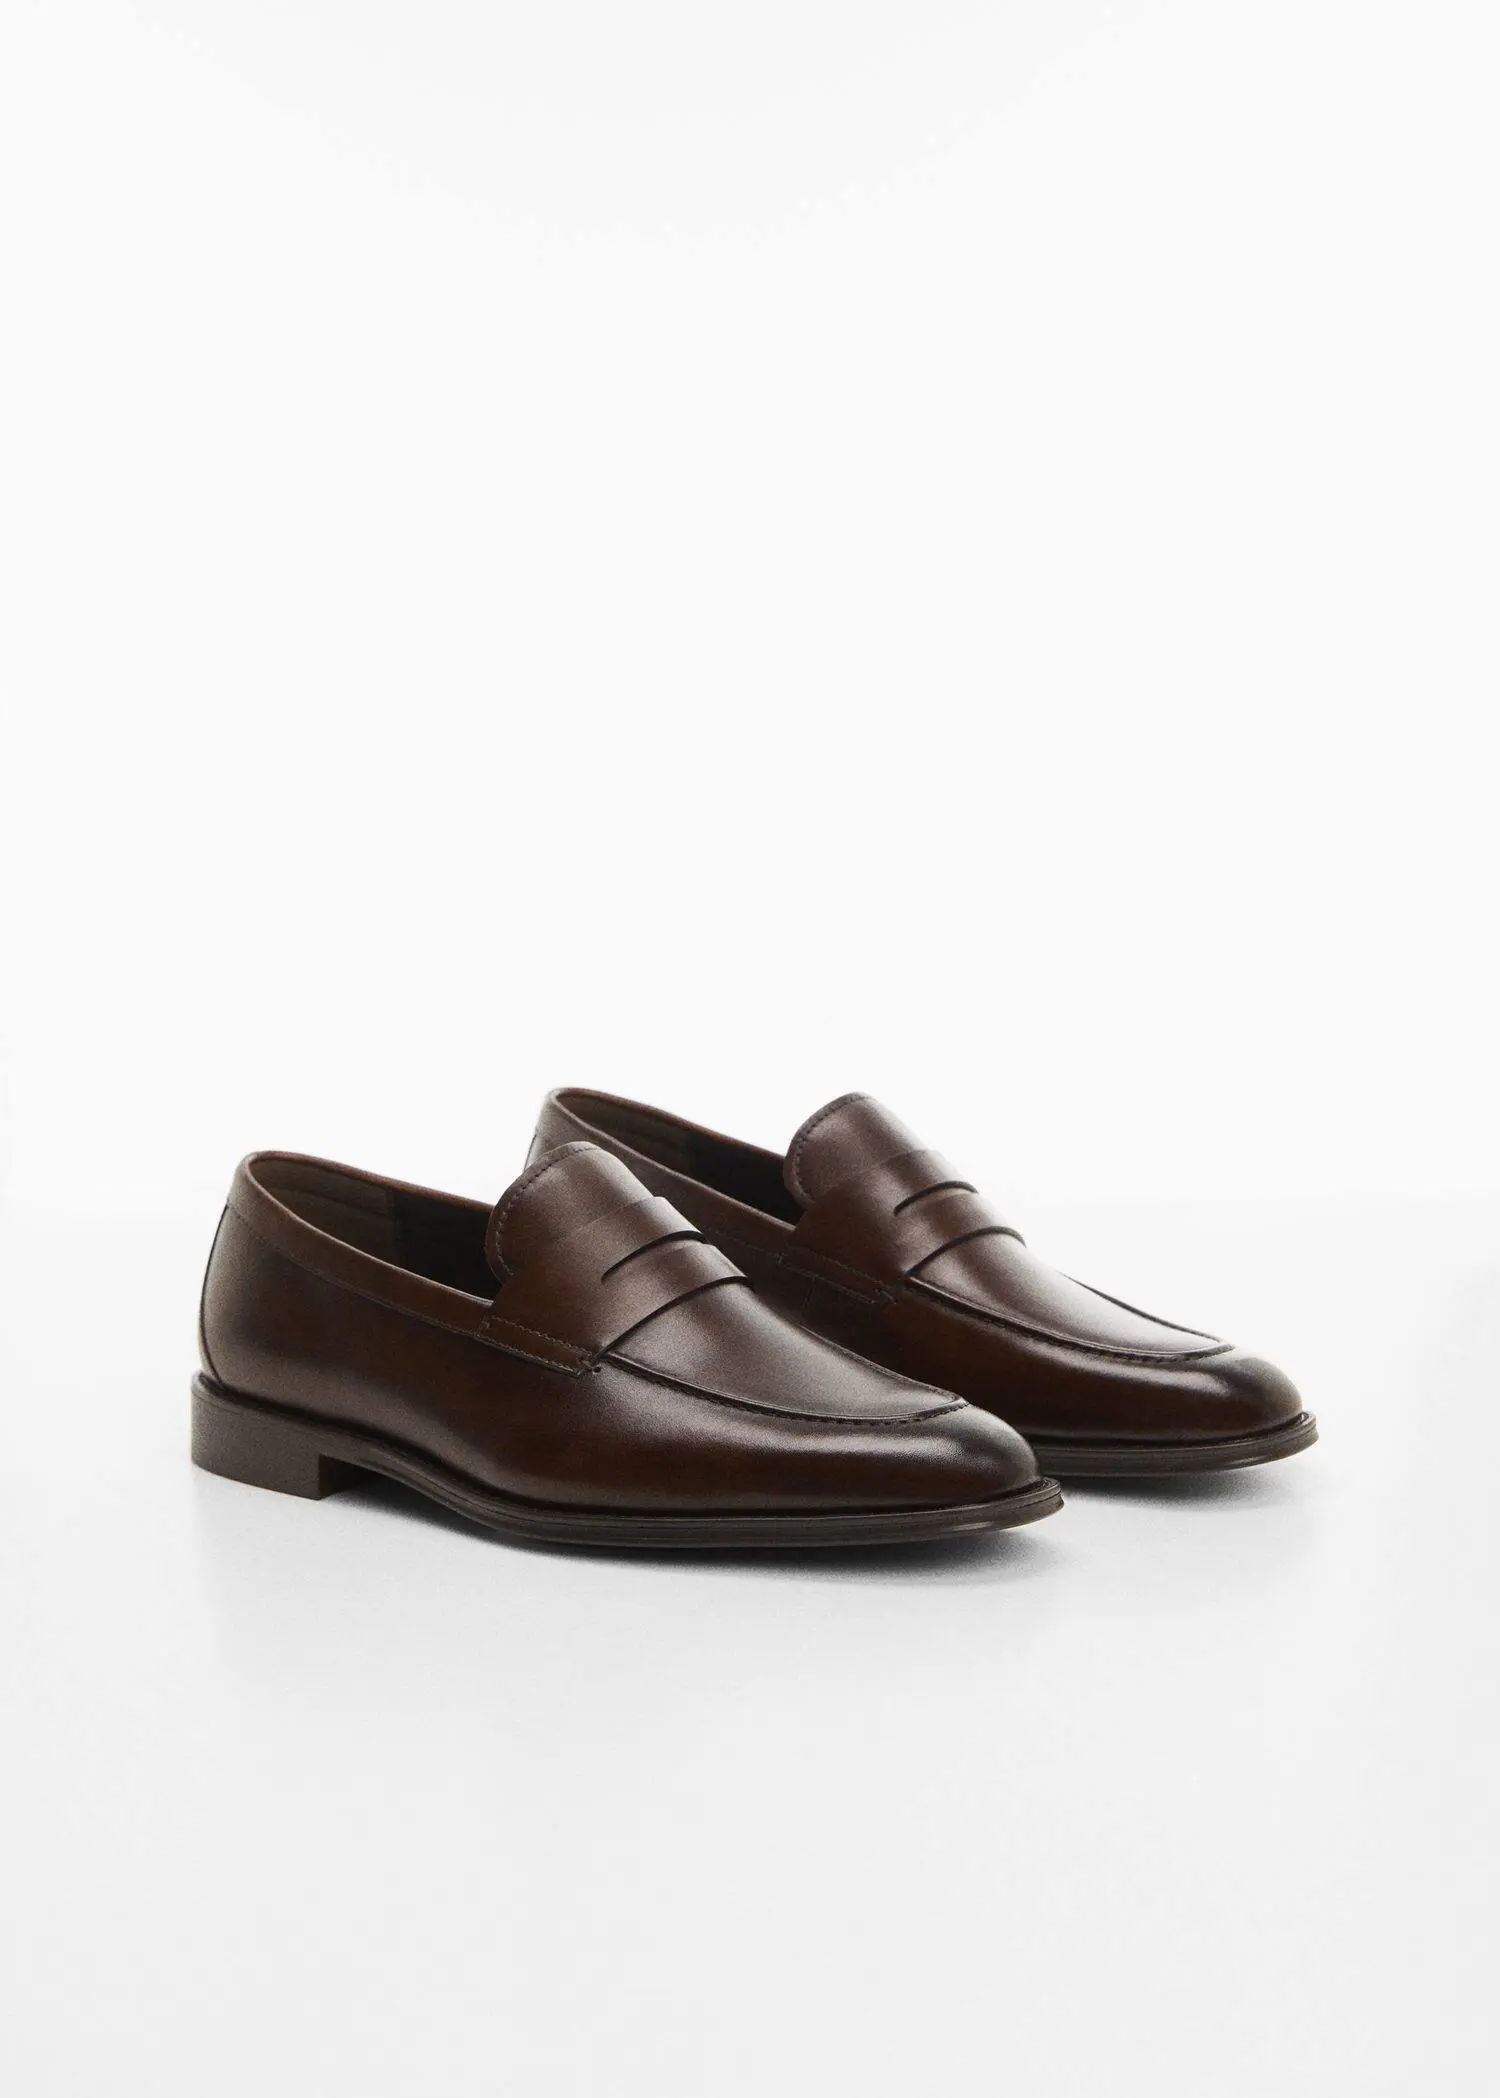 Mango Aged-leather loafers. 1